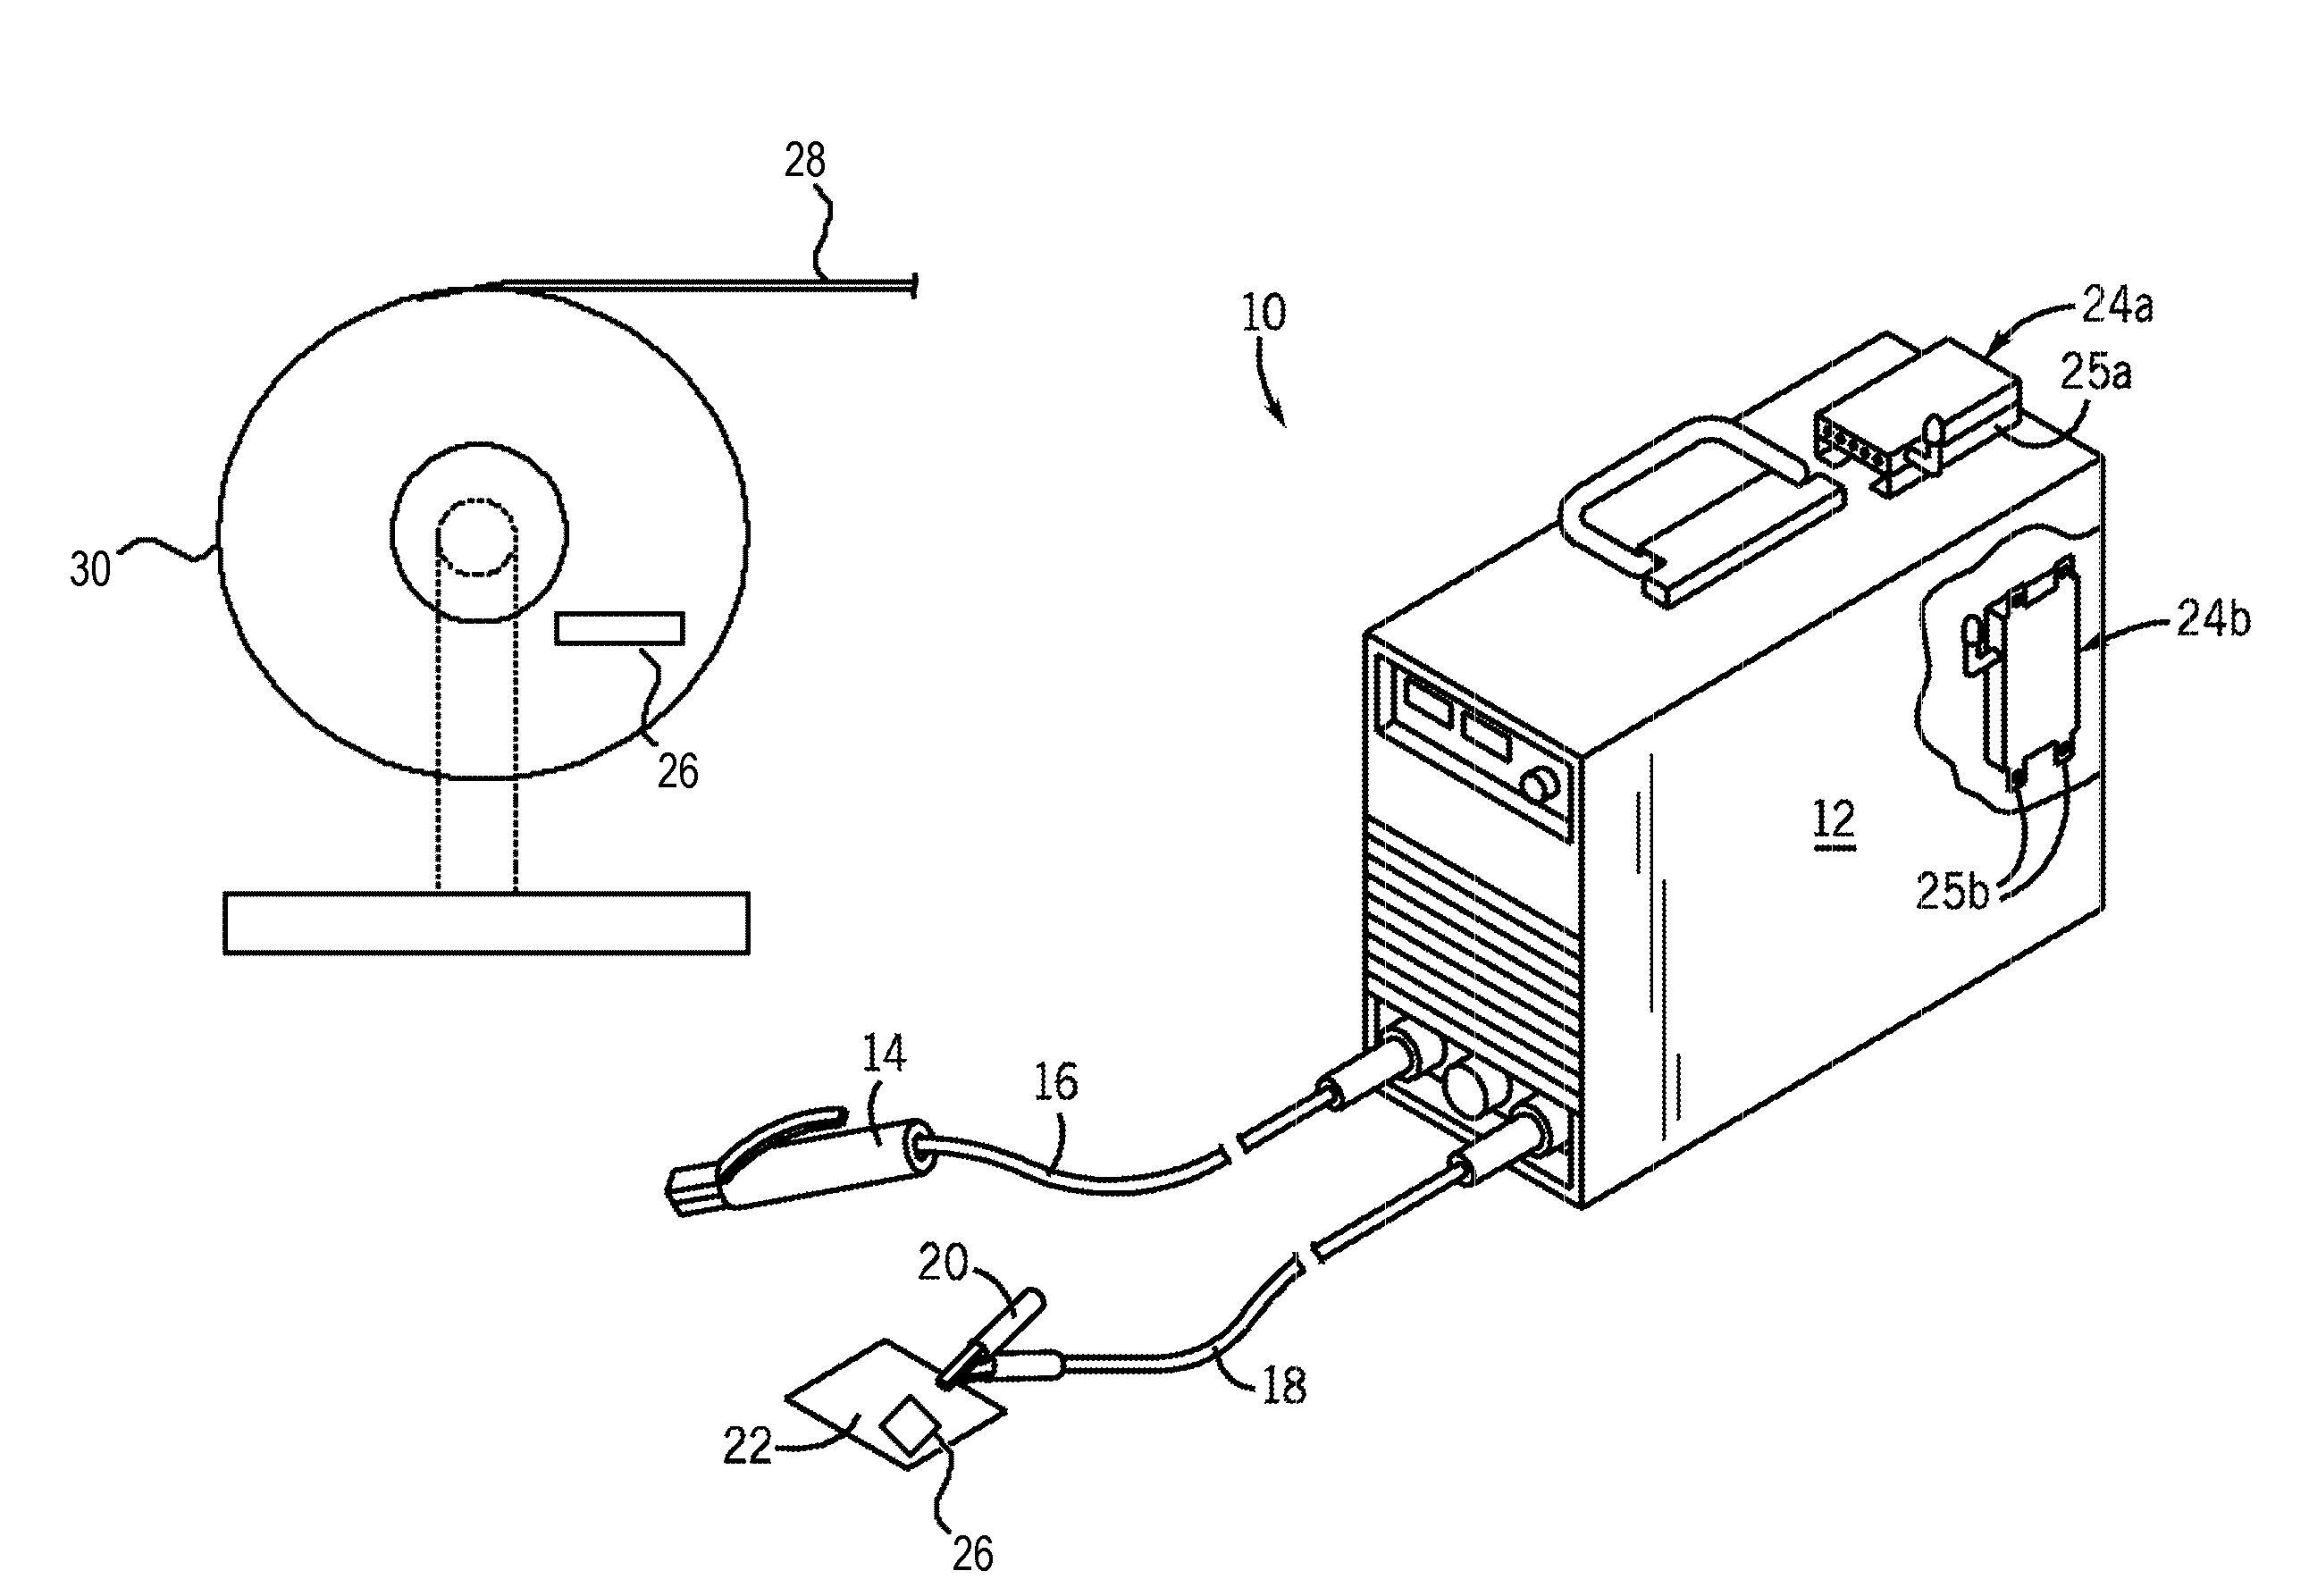 Wireless system control and inventory monitoring for welding-type devices